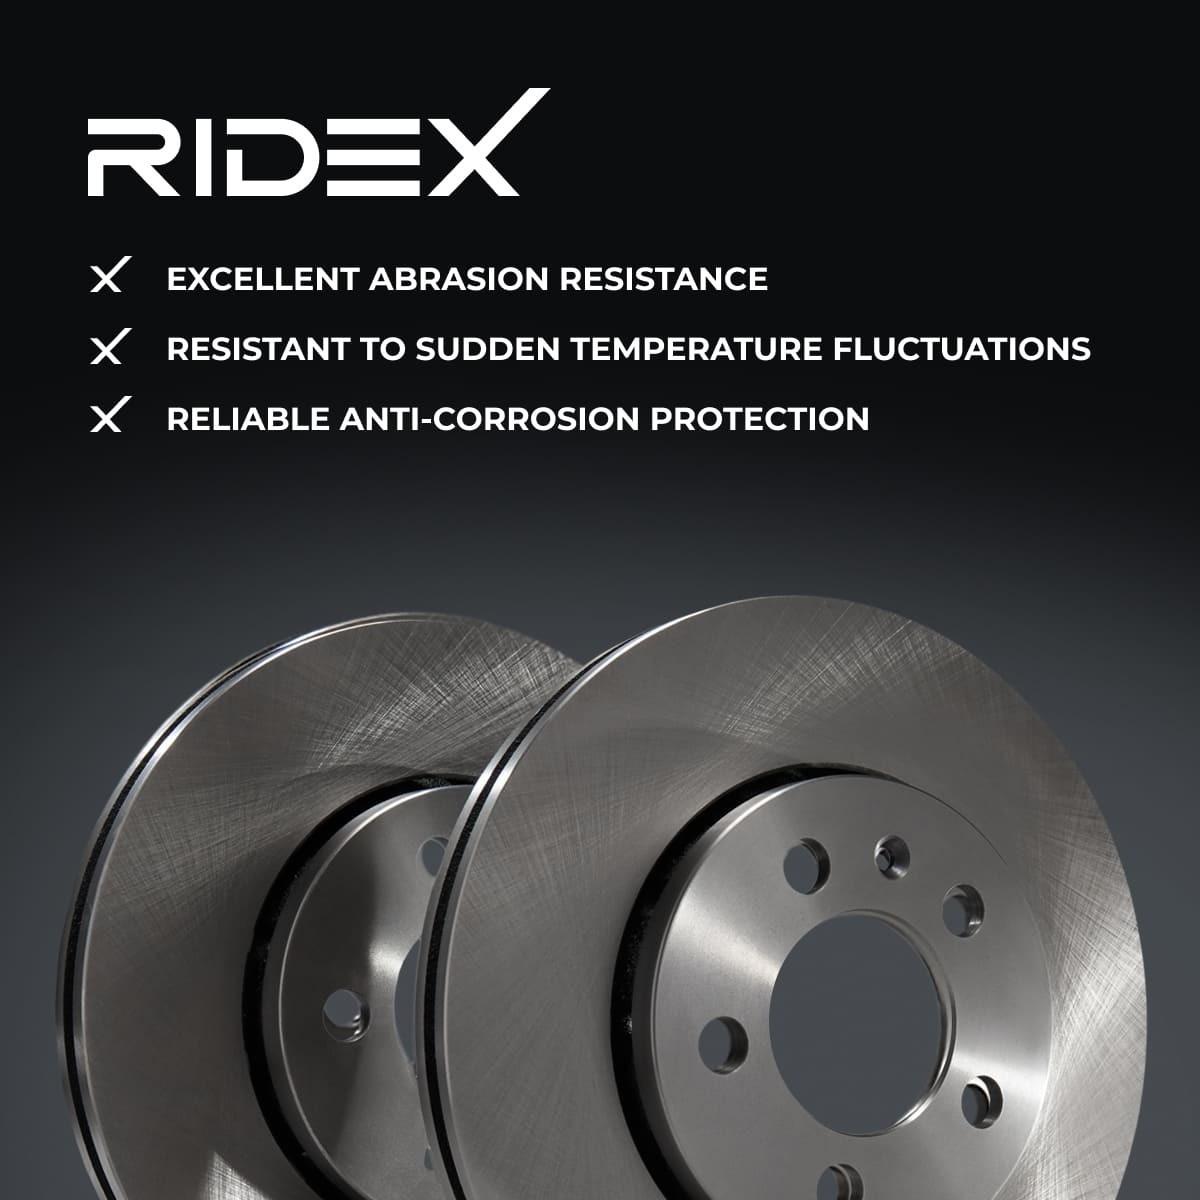 RIDEX 82B0545 Brake rotor Front Axle, 276,0x26mm, 5/7x114,3, Vented